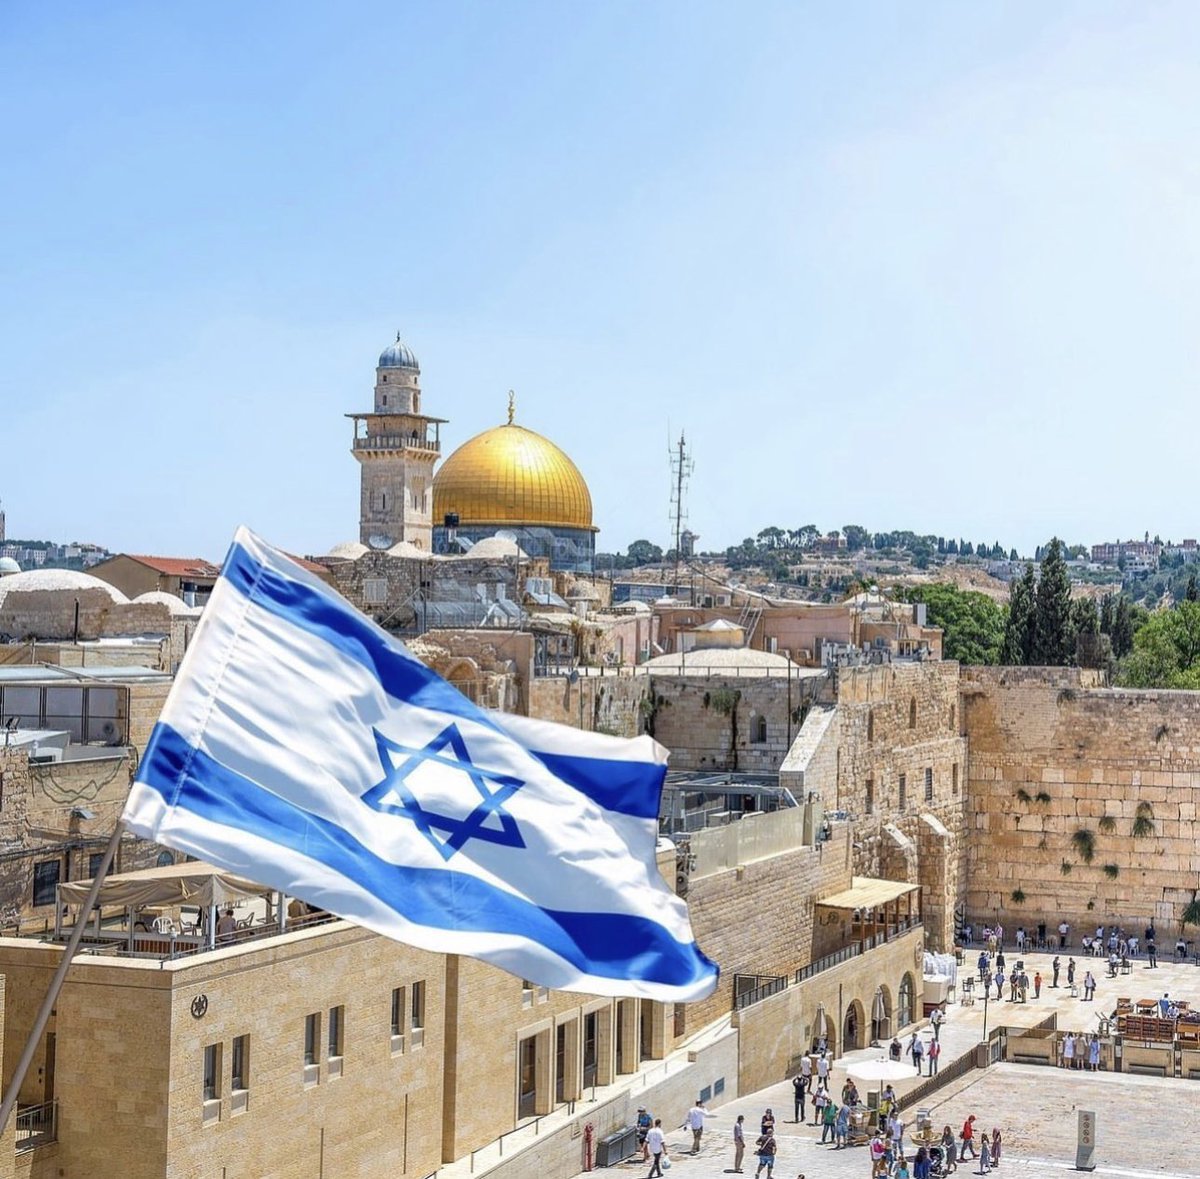 Today marks 76 years since the establishment of the State of Israel. Thanking God today for decades of His hand of protection over this nation. Keep praying for the peace and prosperity of Israel. 🇮🇱